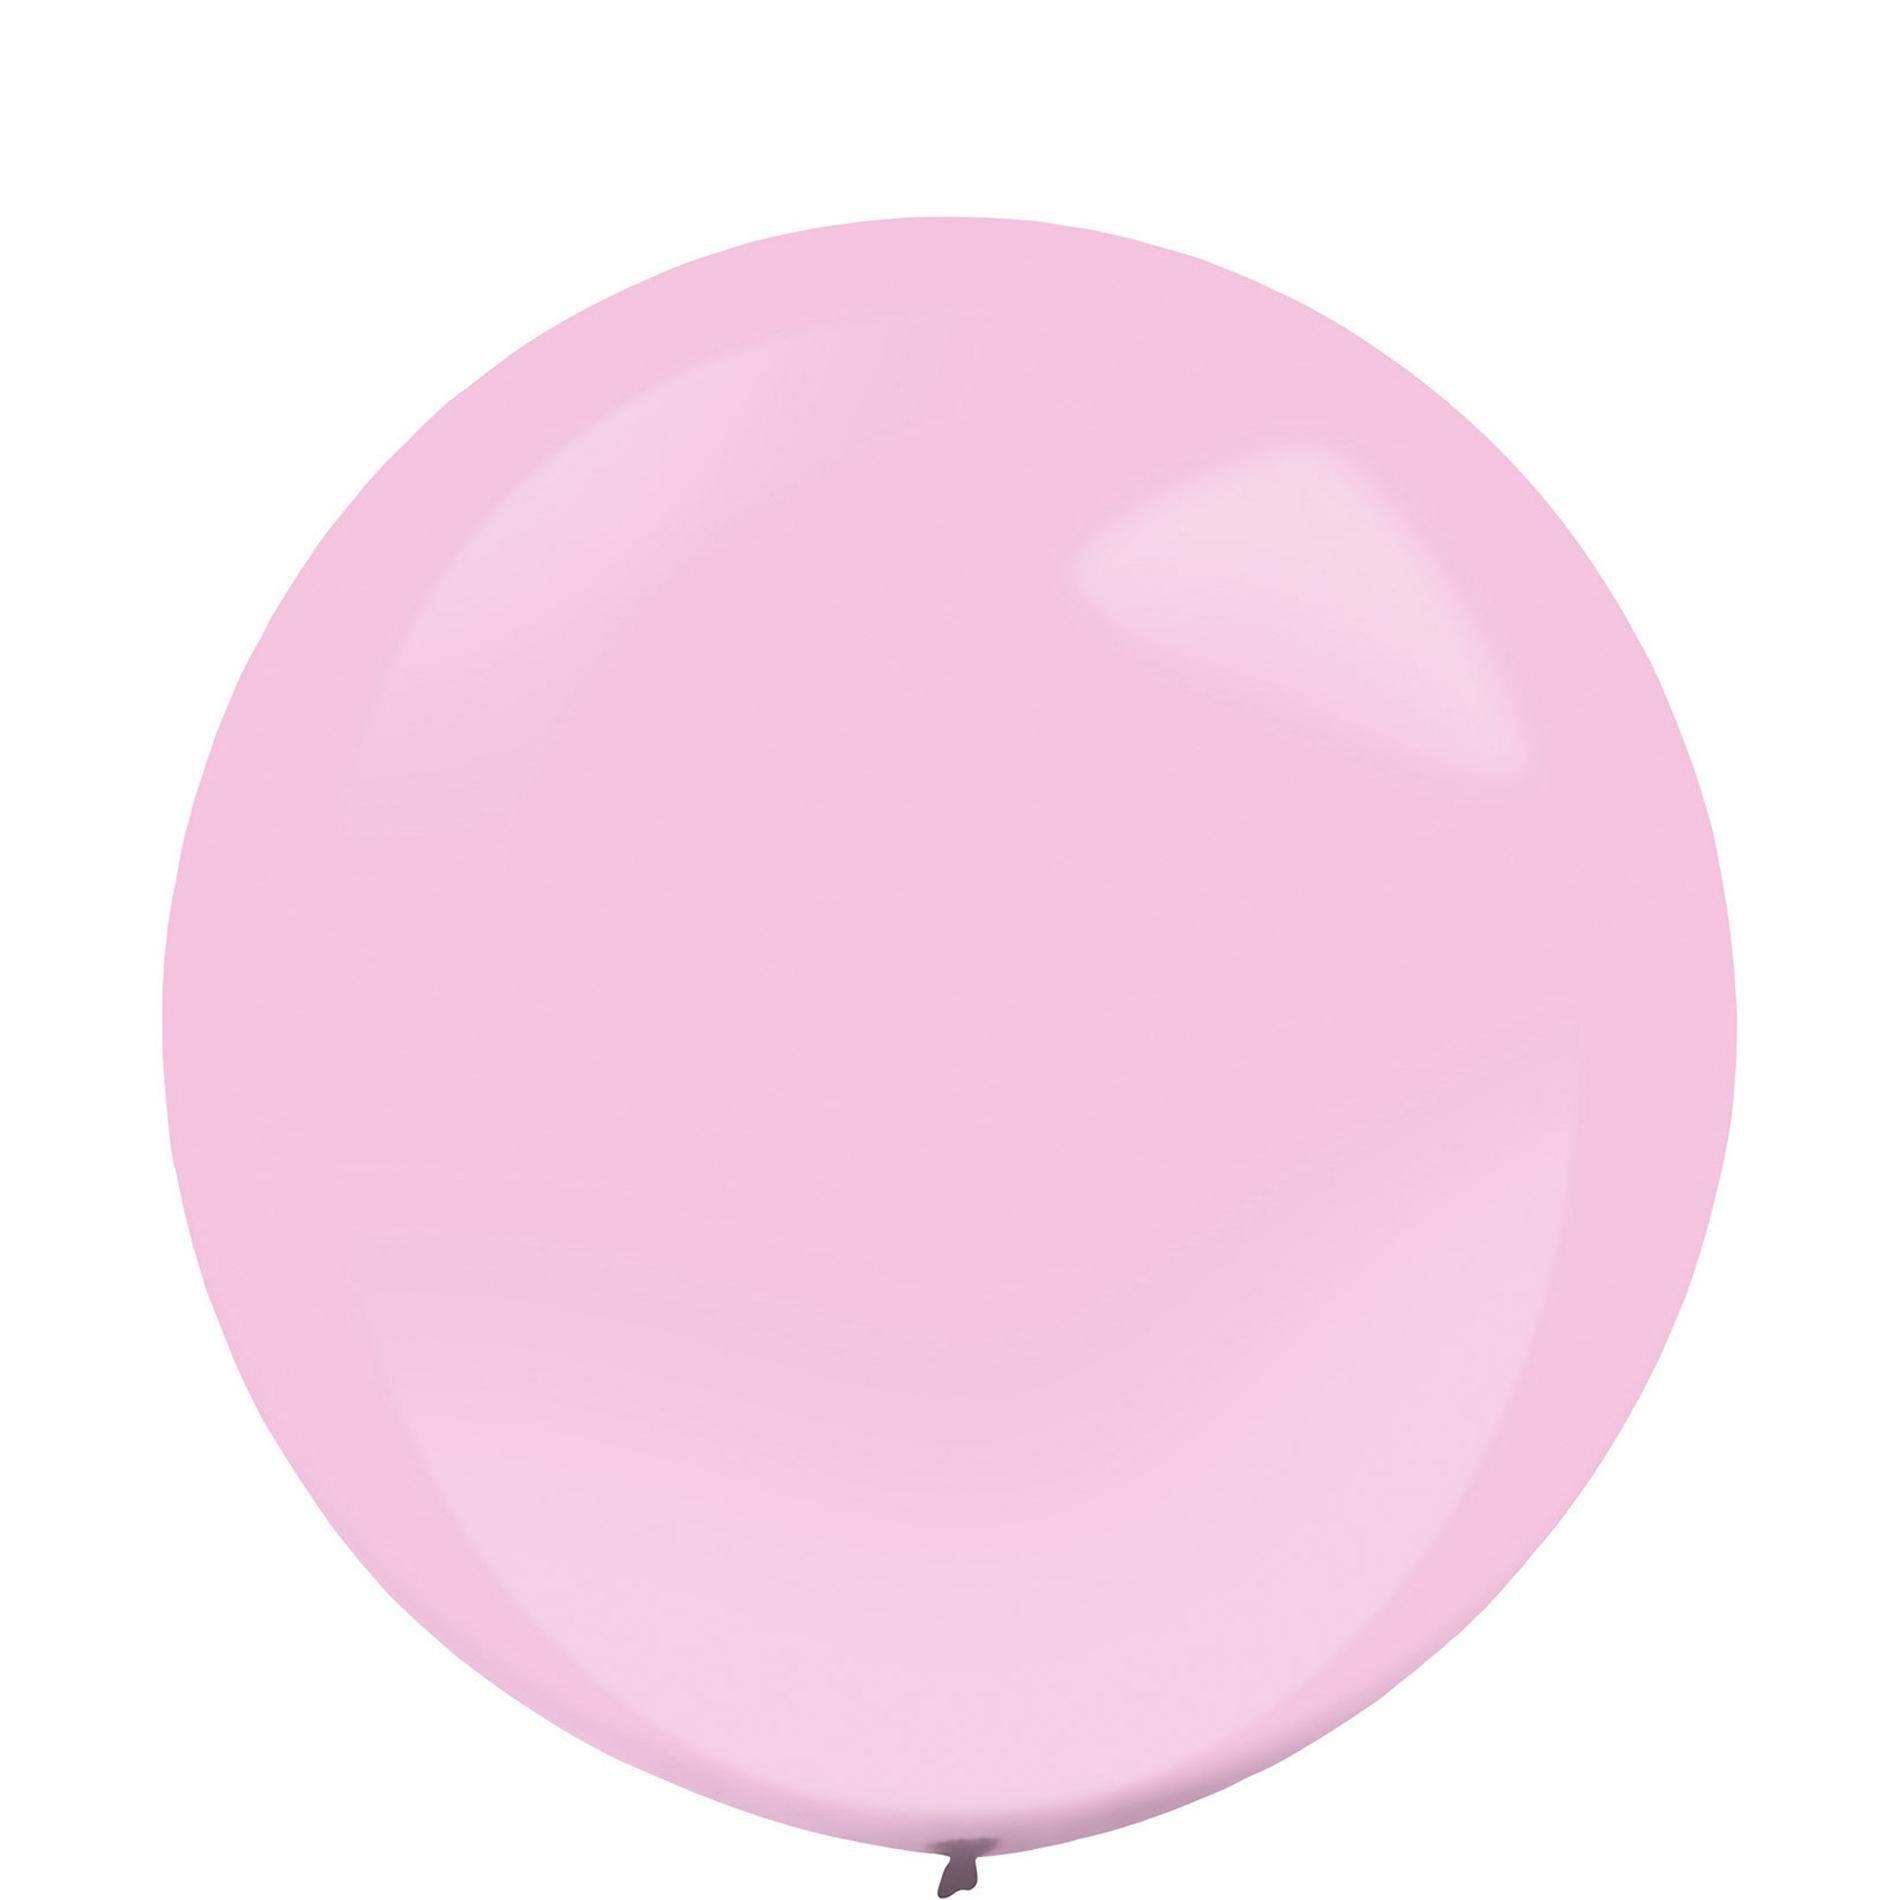 New Pink Fashion Latex Balloons 24in, 4pcs Balloons & Streamers - Party Centre